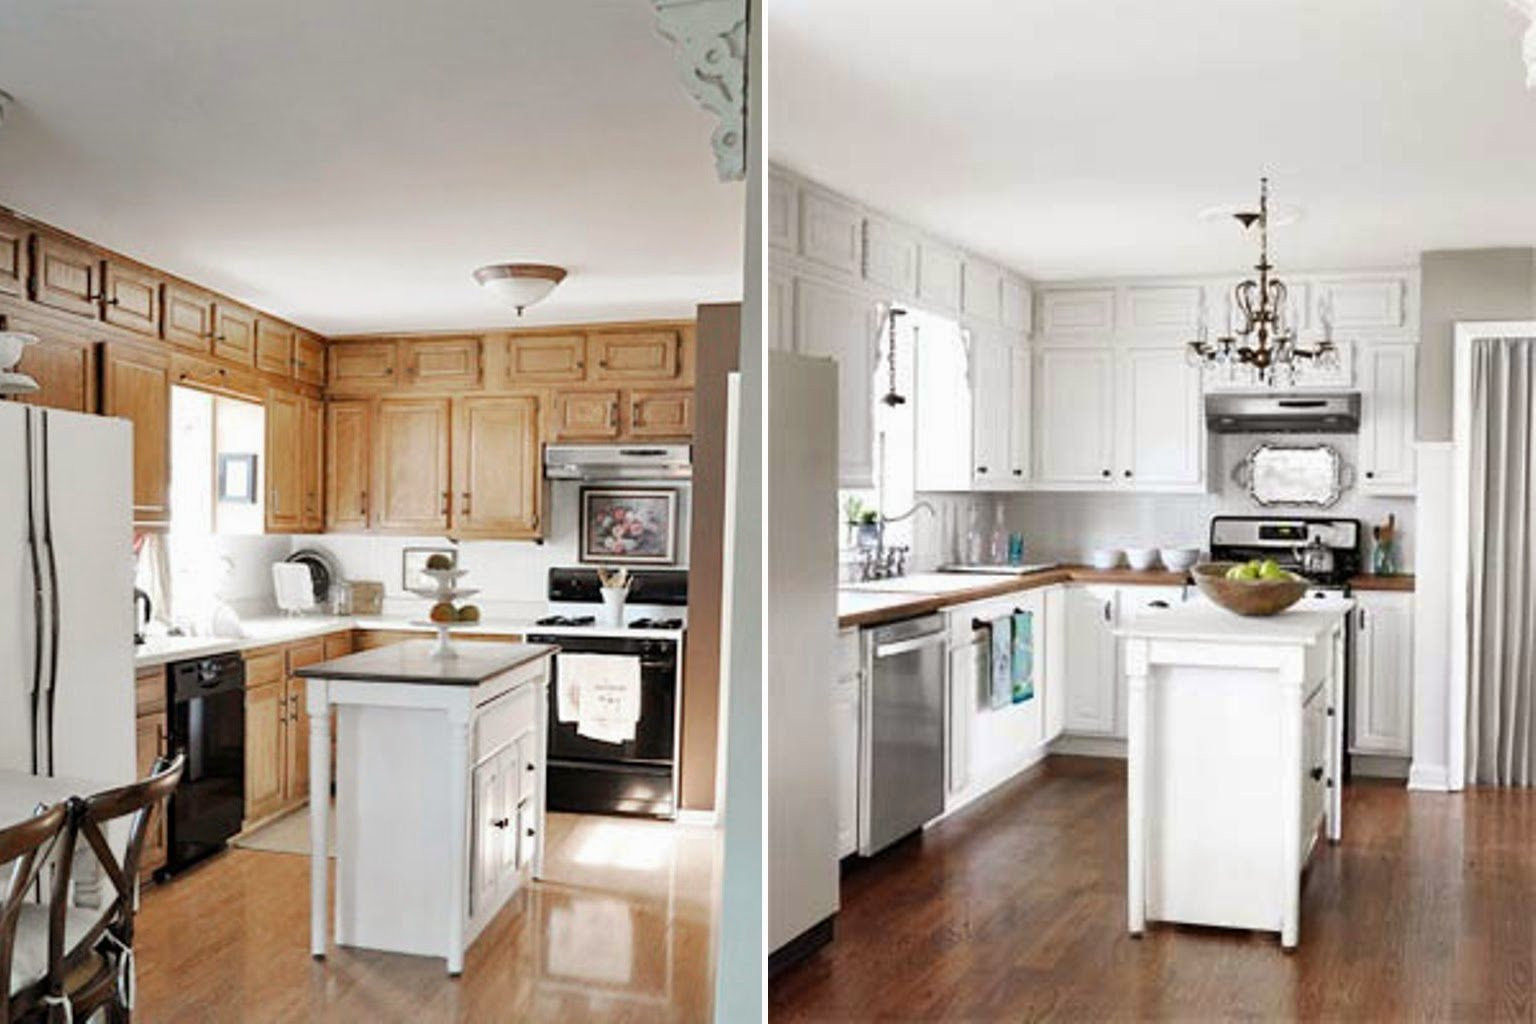 Repainting Kitchen Cabinets White
 Paint Kitchen Cabinets White Before and After Home